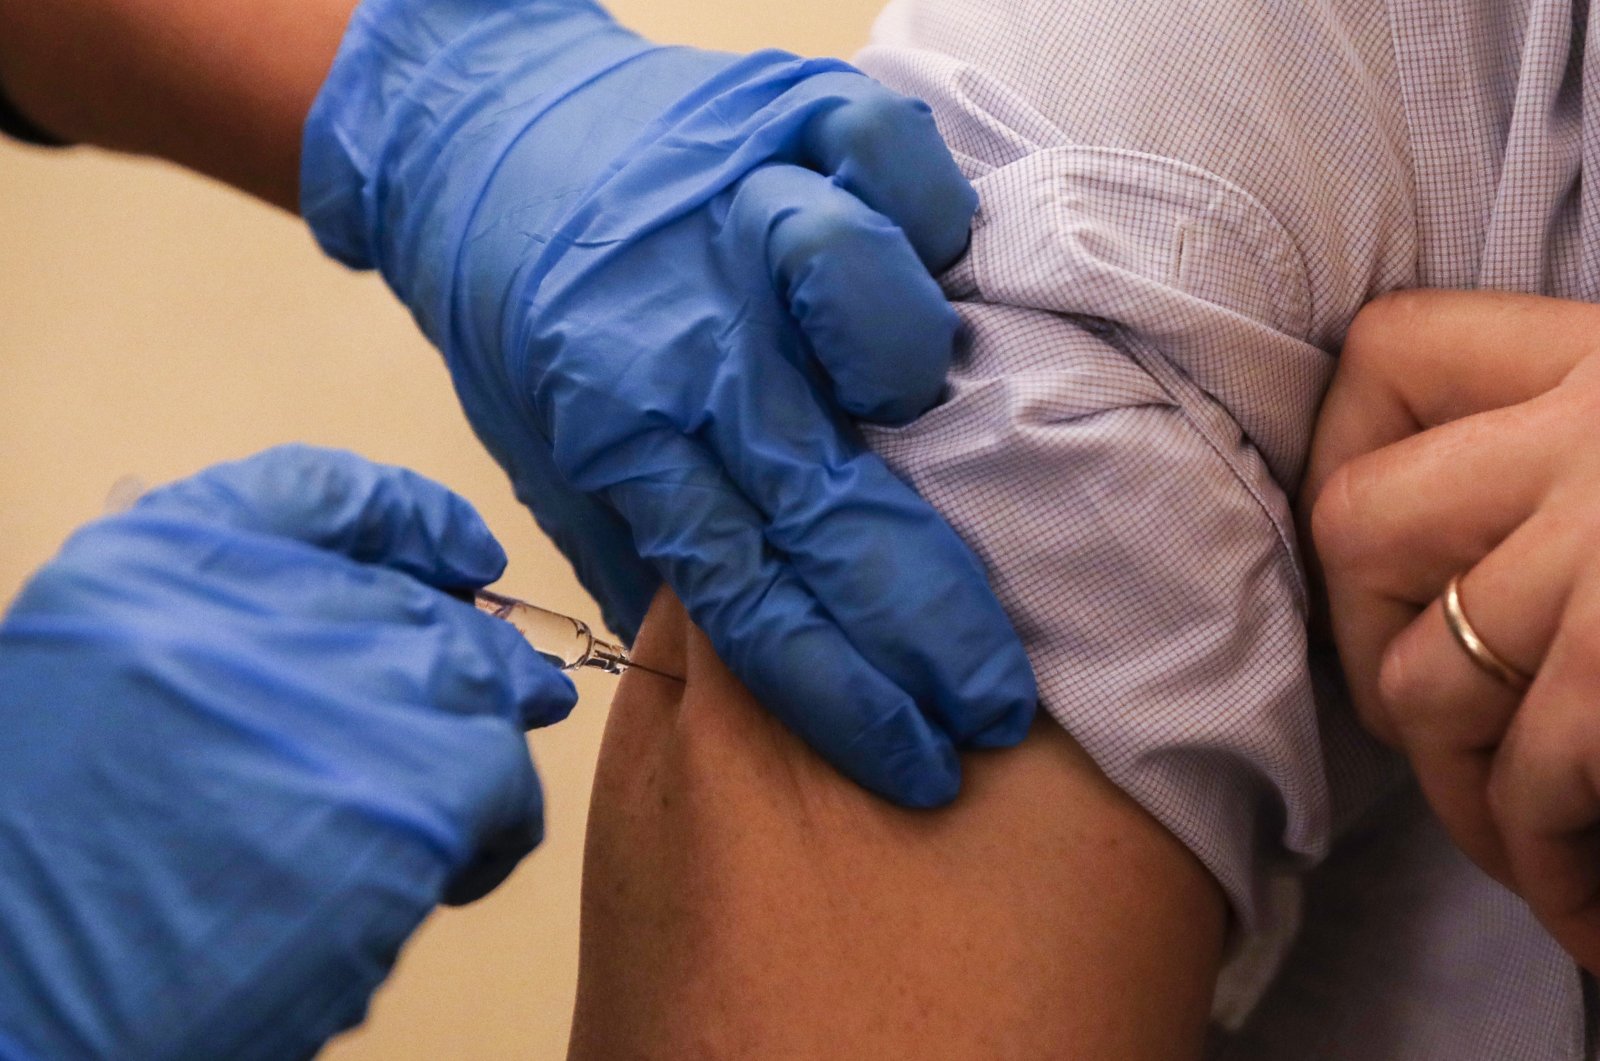 A nurse injects a flu vaccine at the museum of science and technology in Milan, Italy, Nov. 4, 2020. (AP Photo)